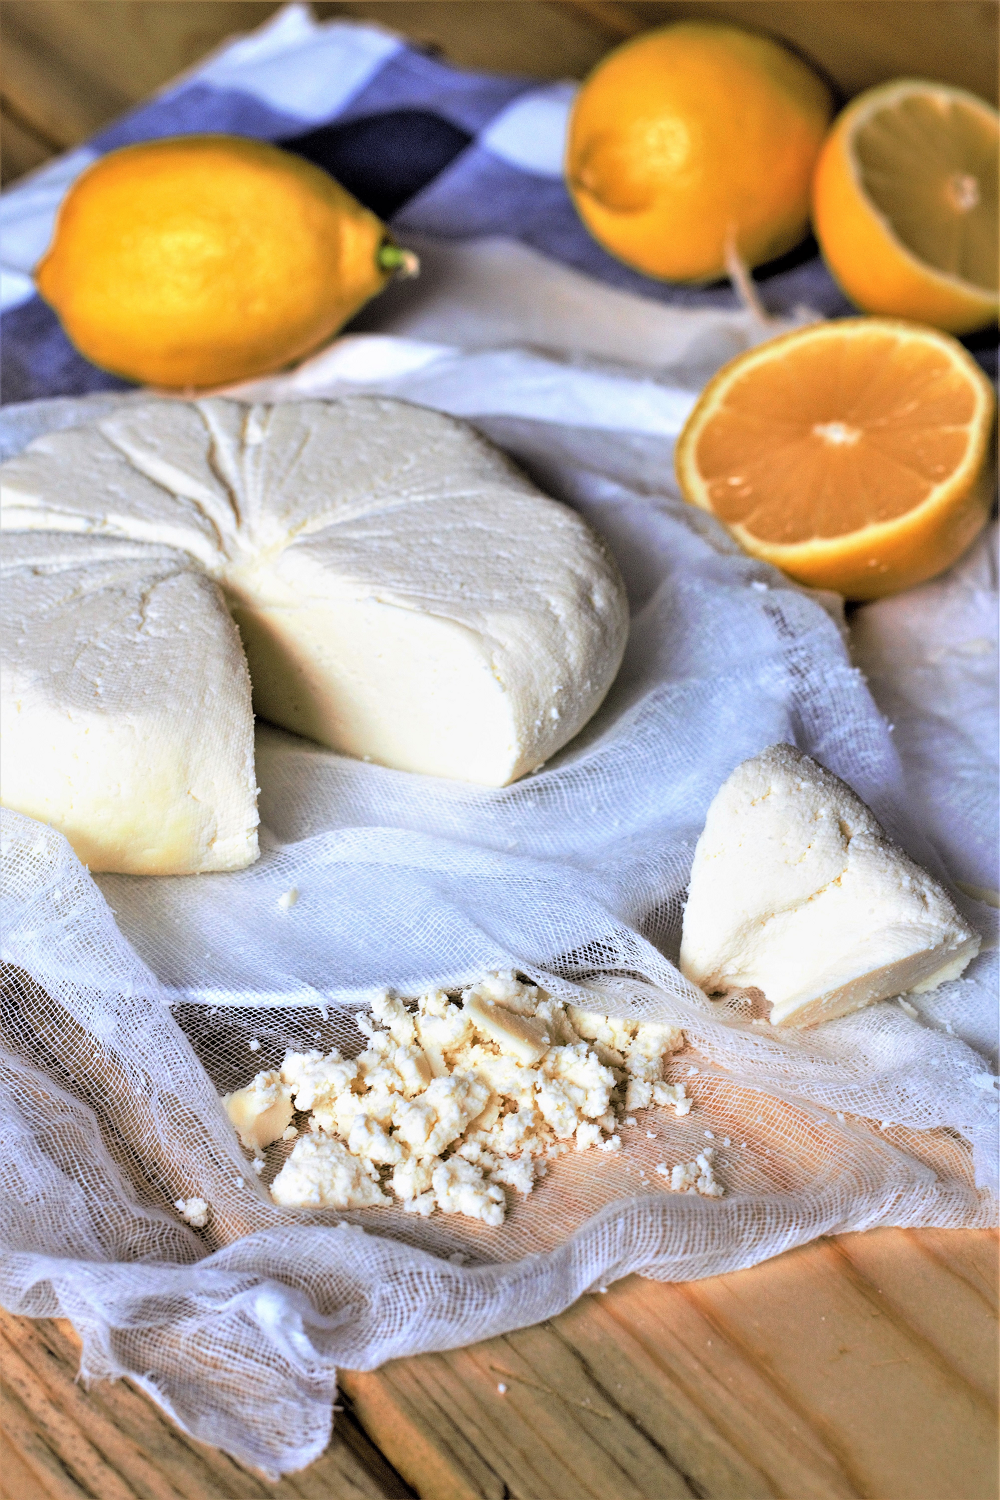 Paneer is the most delicious, dense Indian cheese that's made with just two ingredients - whole milk and lemon juice - and sous vide makes it impossibly easy, heating to the perfect temperature with zero cleanup!